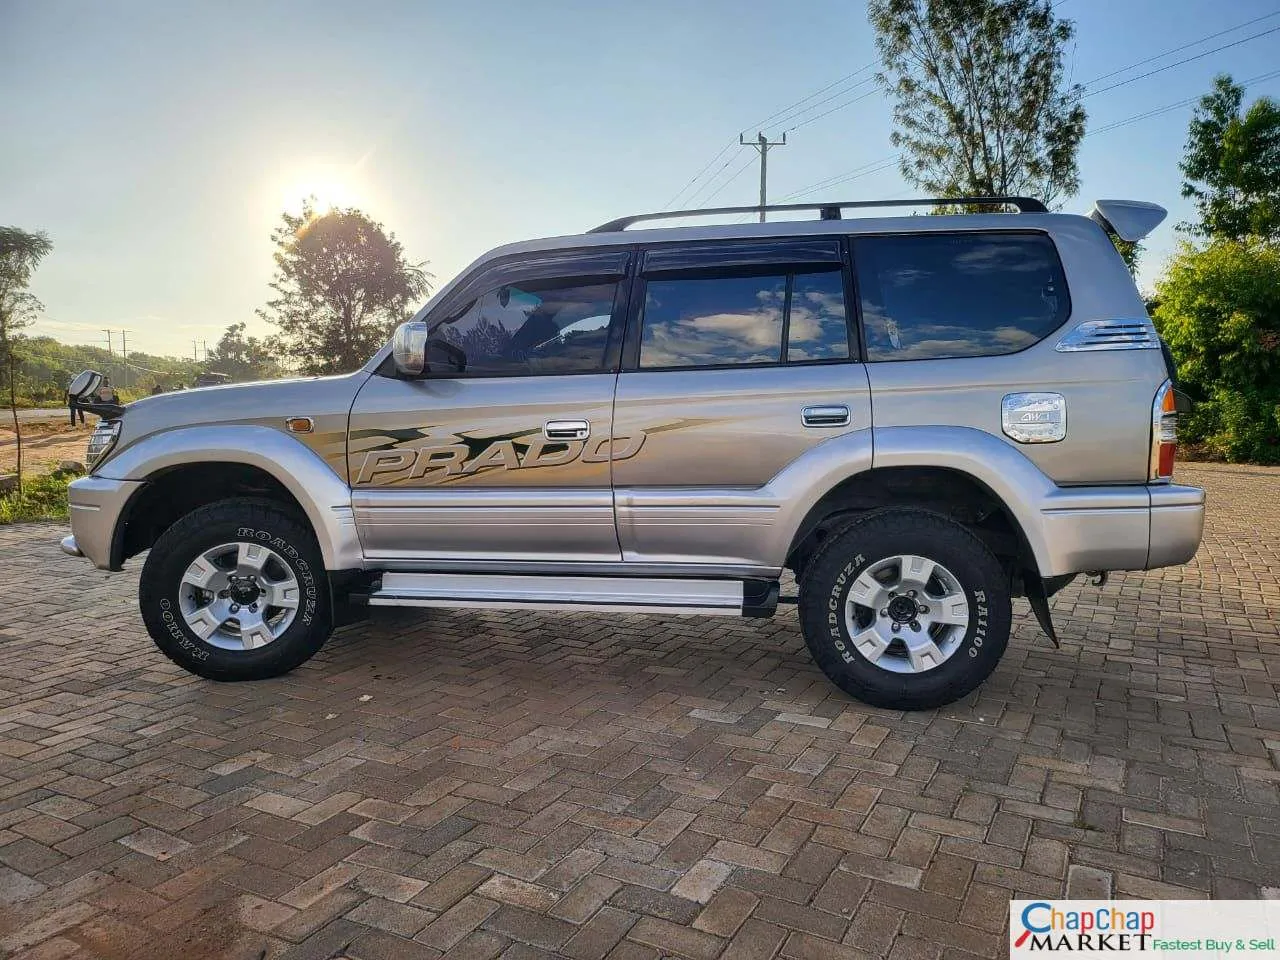 Toyota Prado 95 Auto 🔥 🔥 You Pay 30% Deposit Trade in OK Hire purchase installments new offer